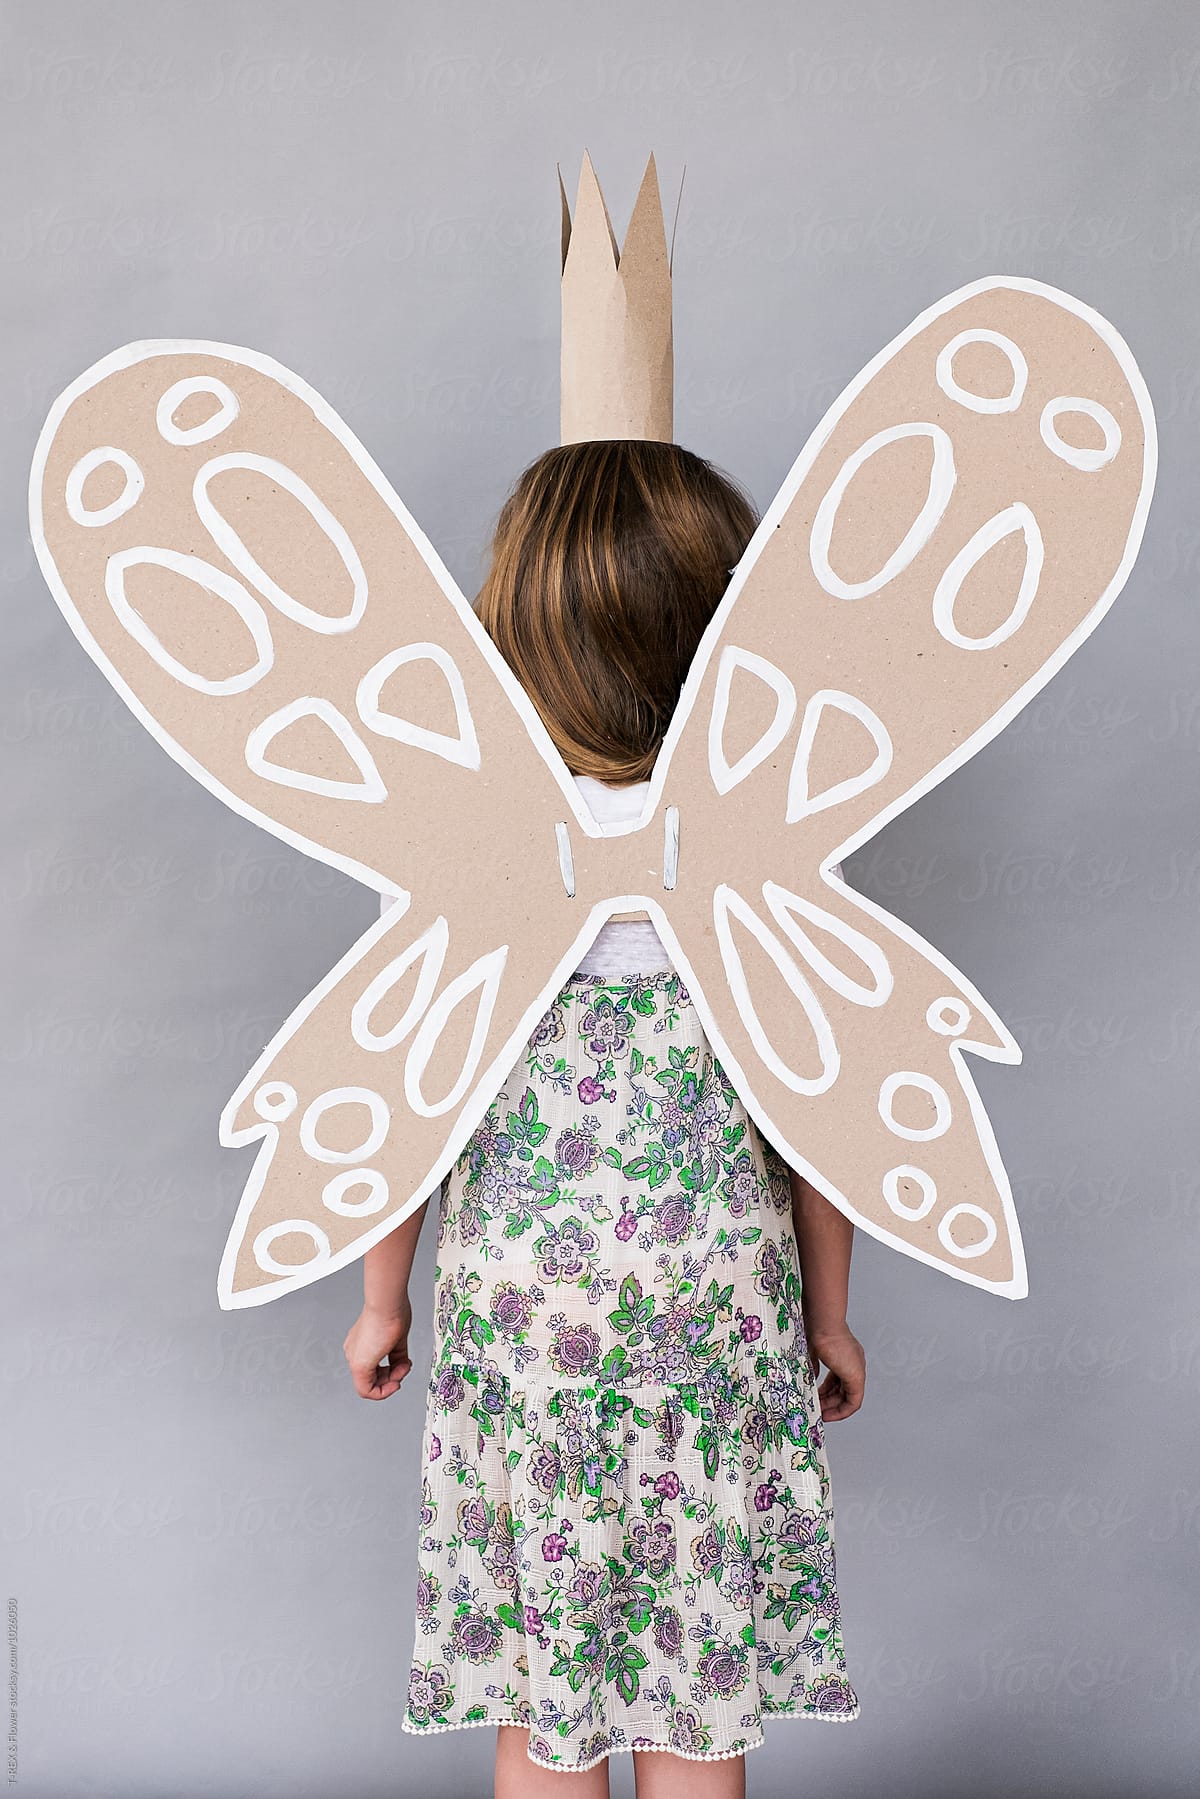 Unrecognizable girl with handmade butterfly wings and crown